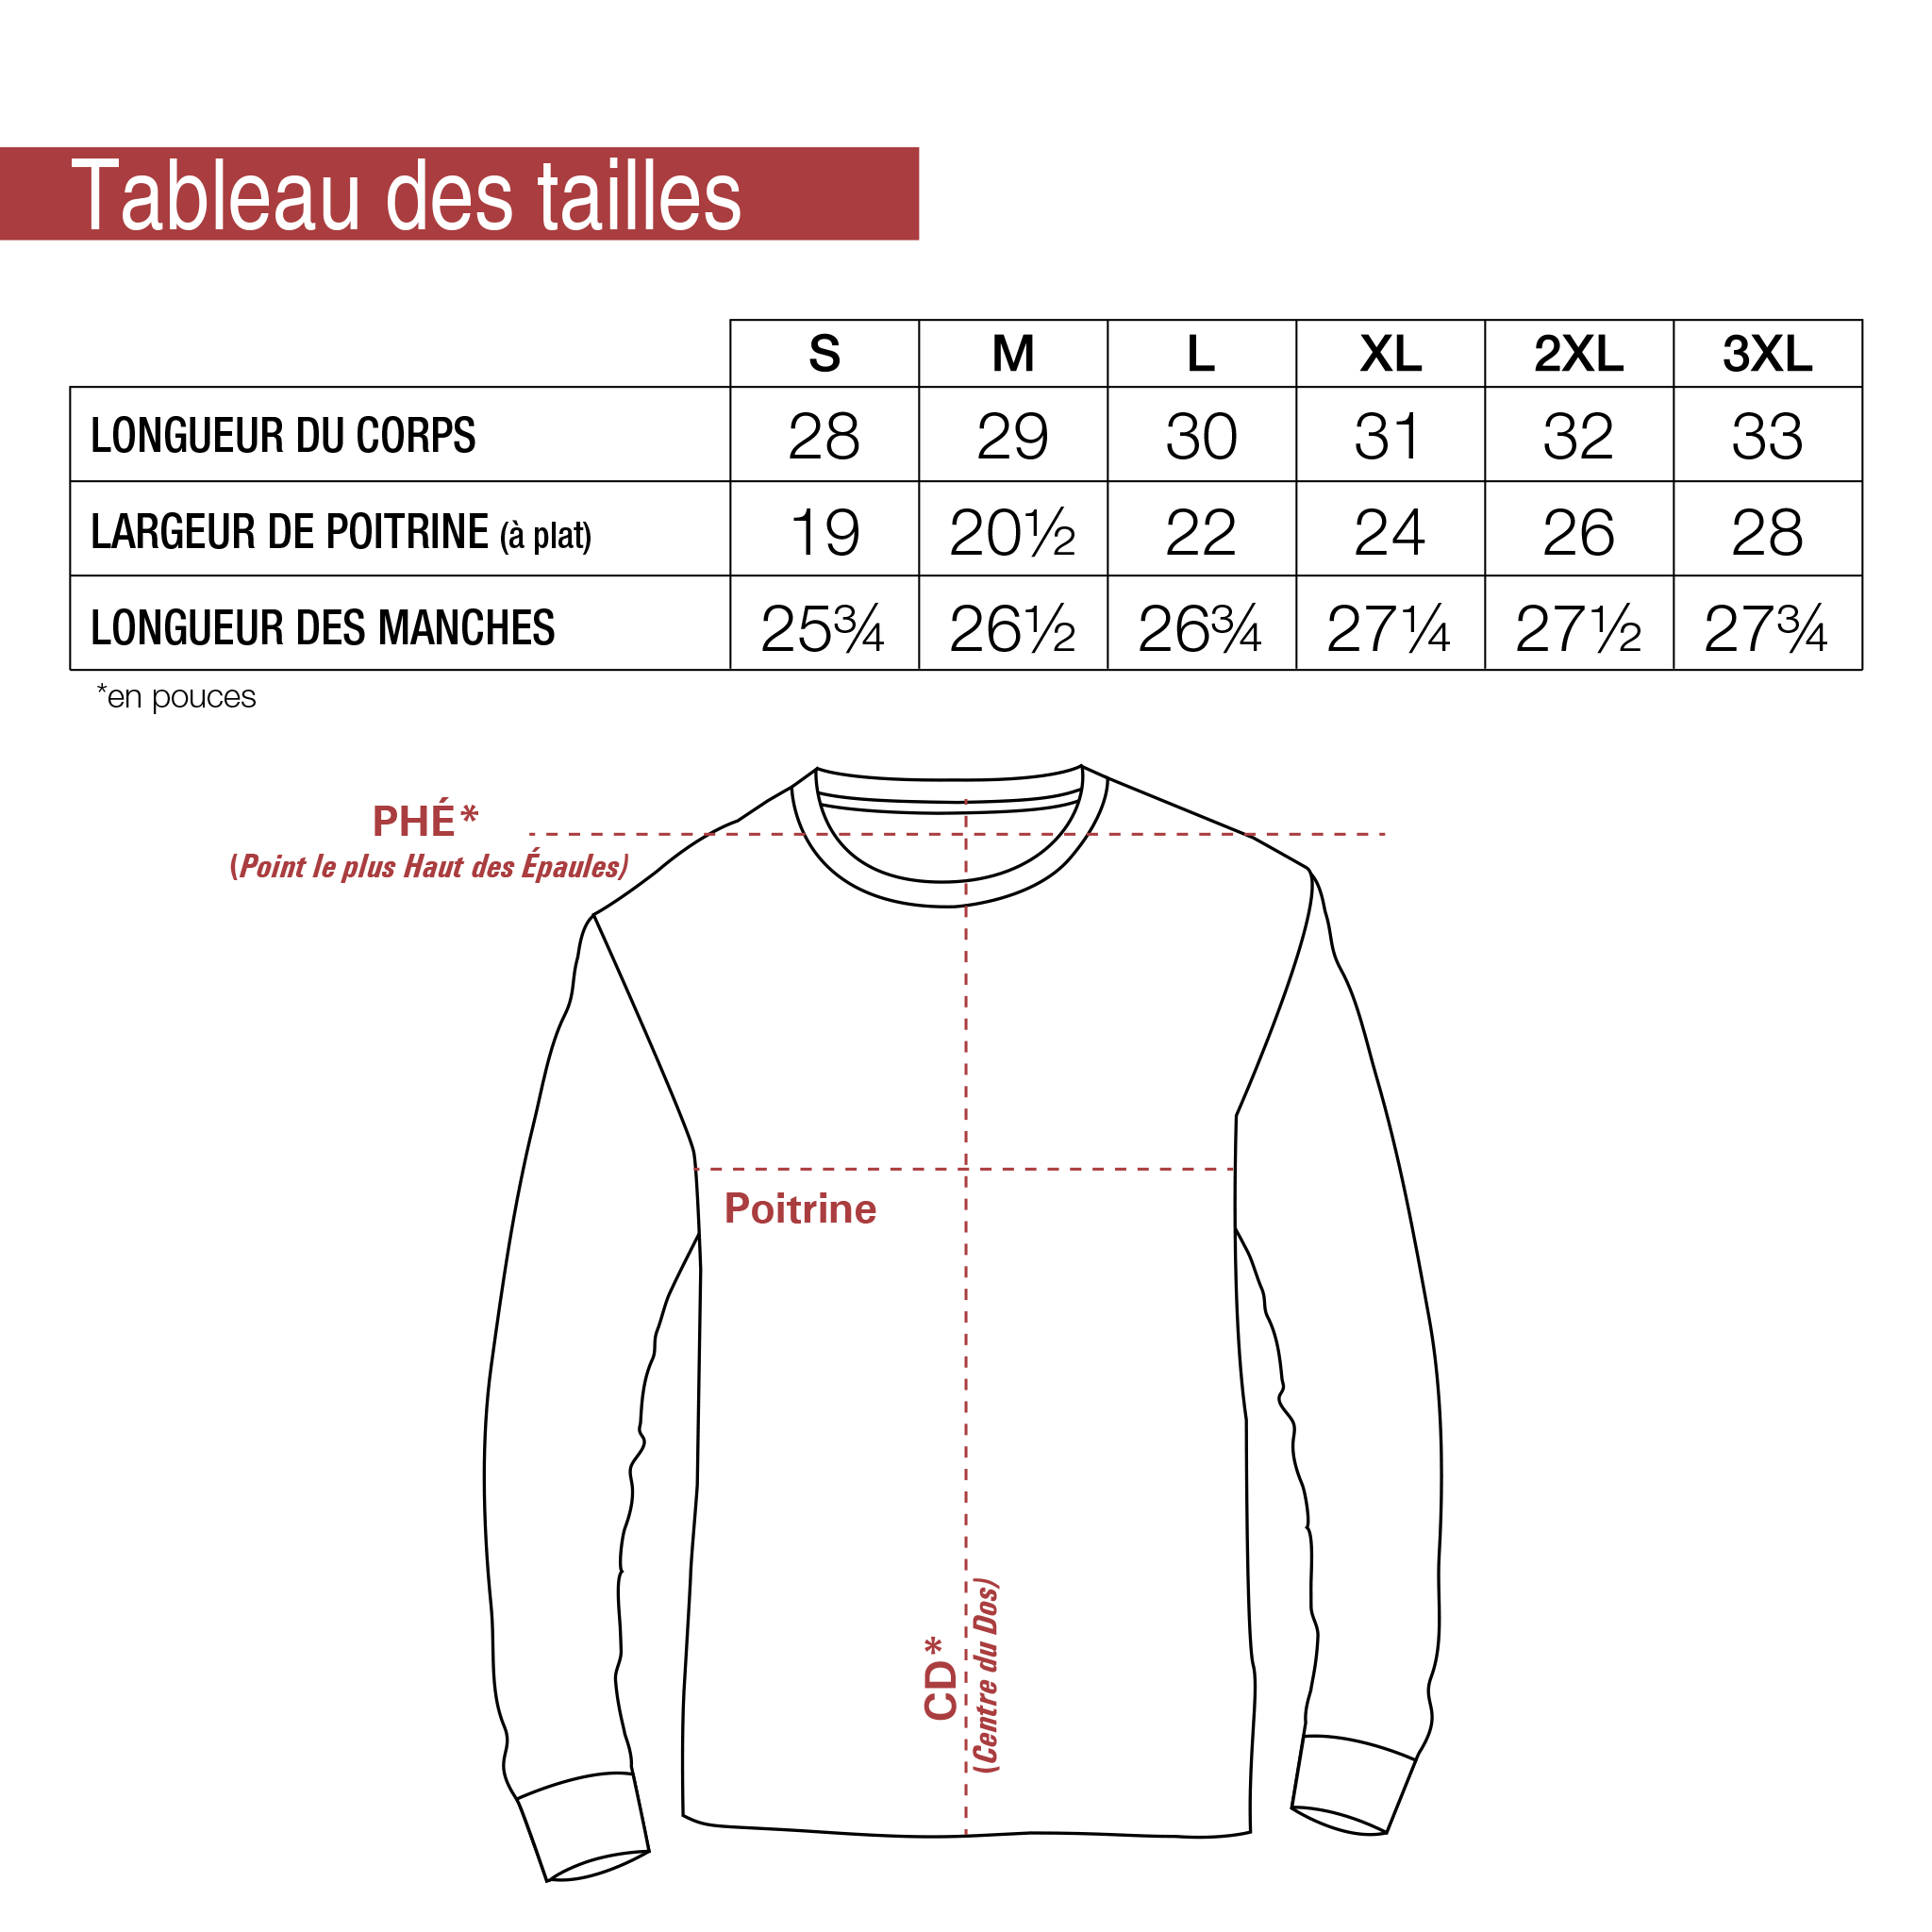 Tableau-taille-6211NL.png